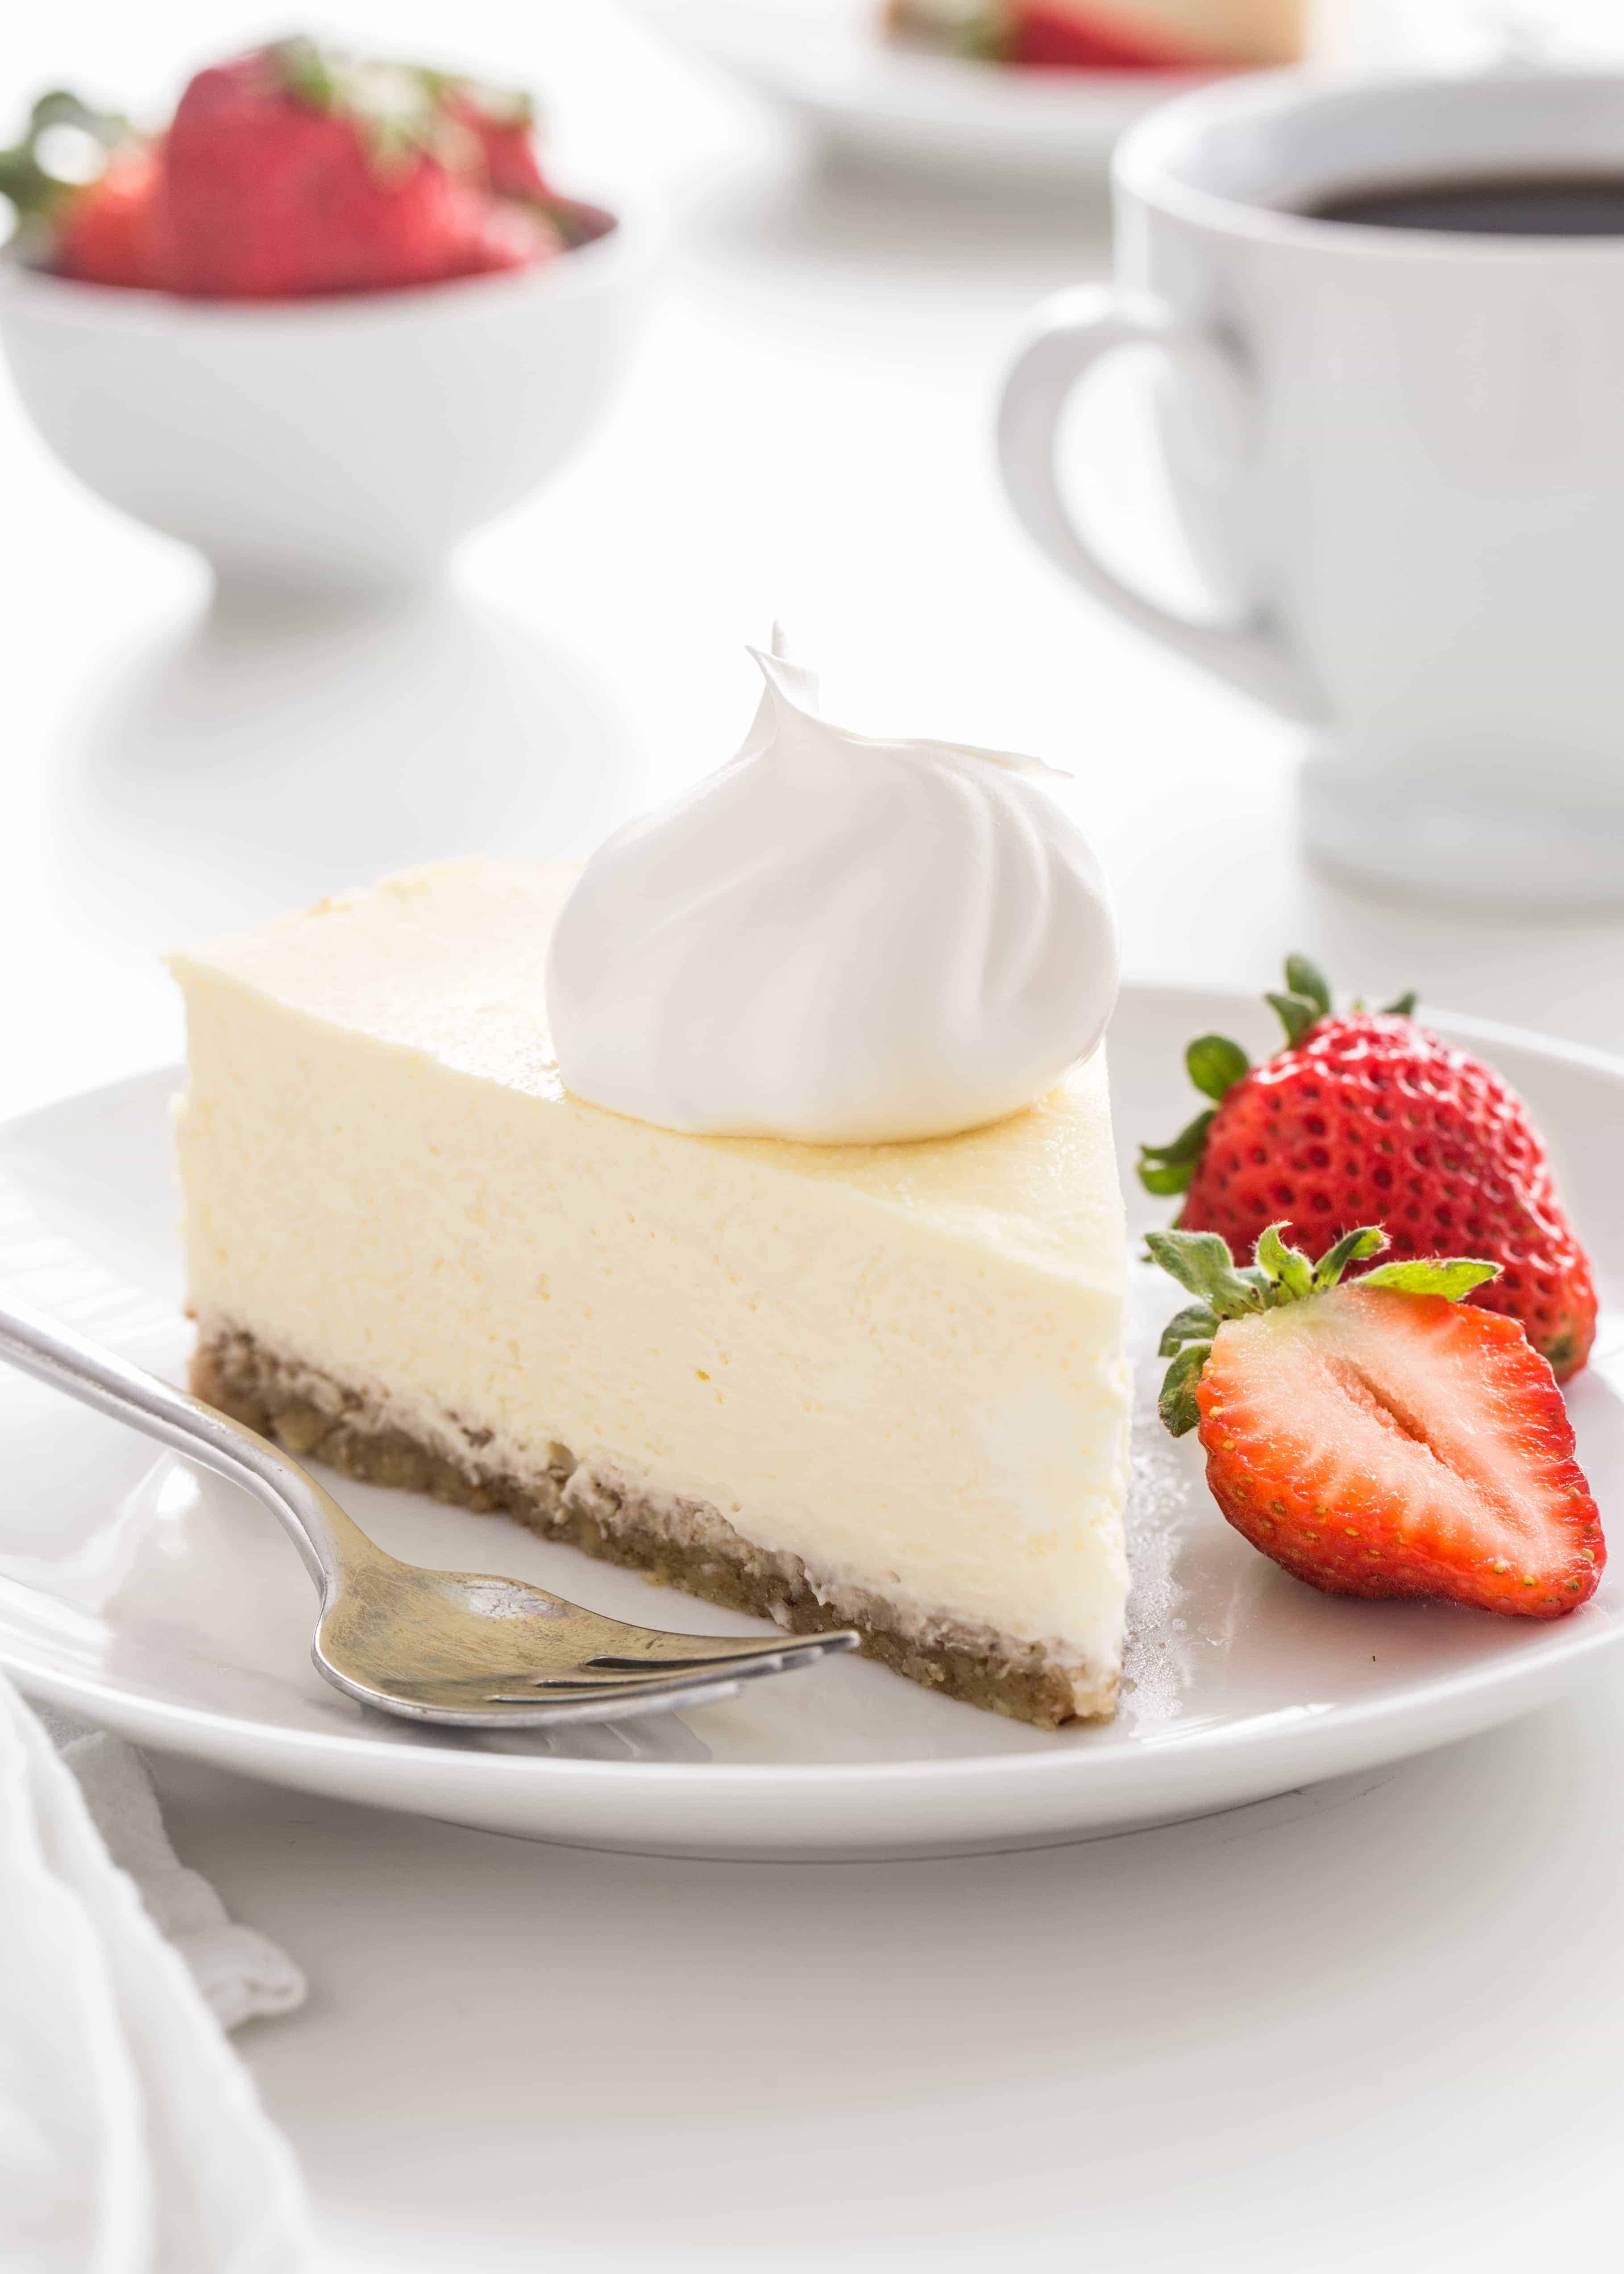 Low Carb Cheesecake has all the delicious flavor and creamy texture of traditional cheesecake without the added sugar.